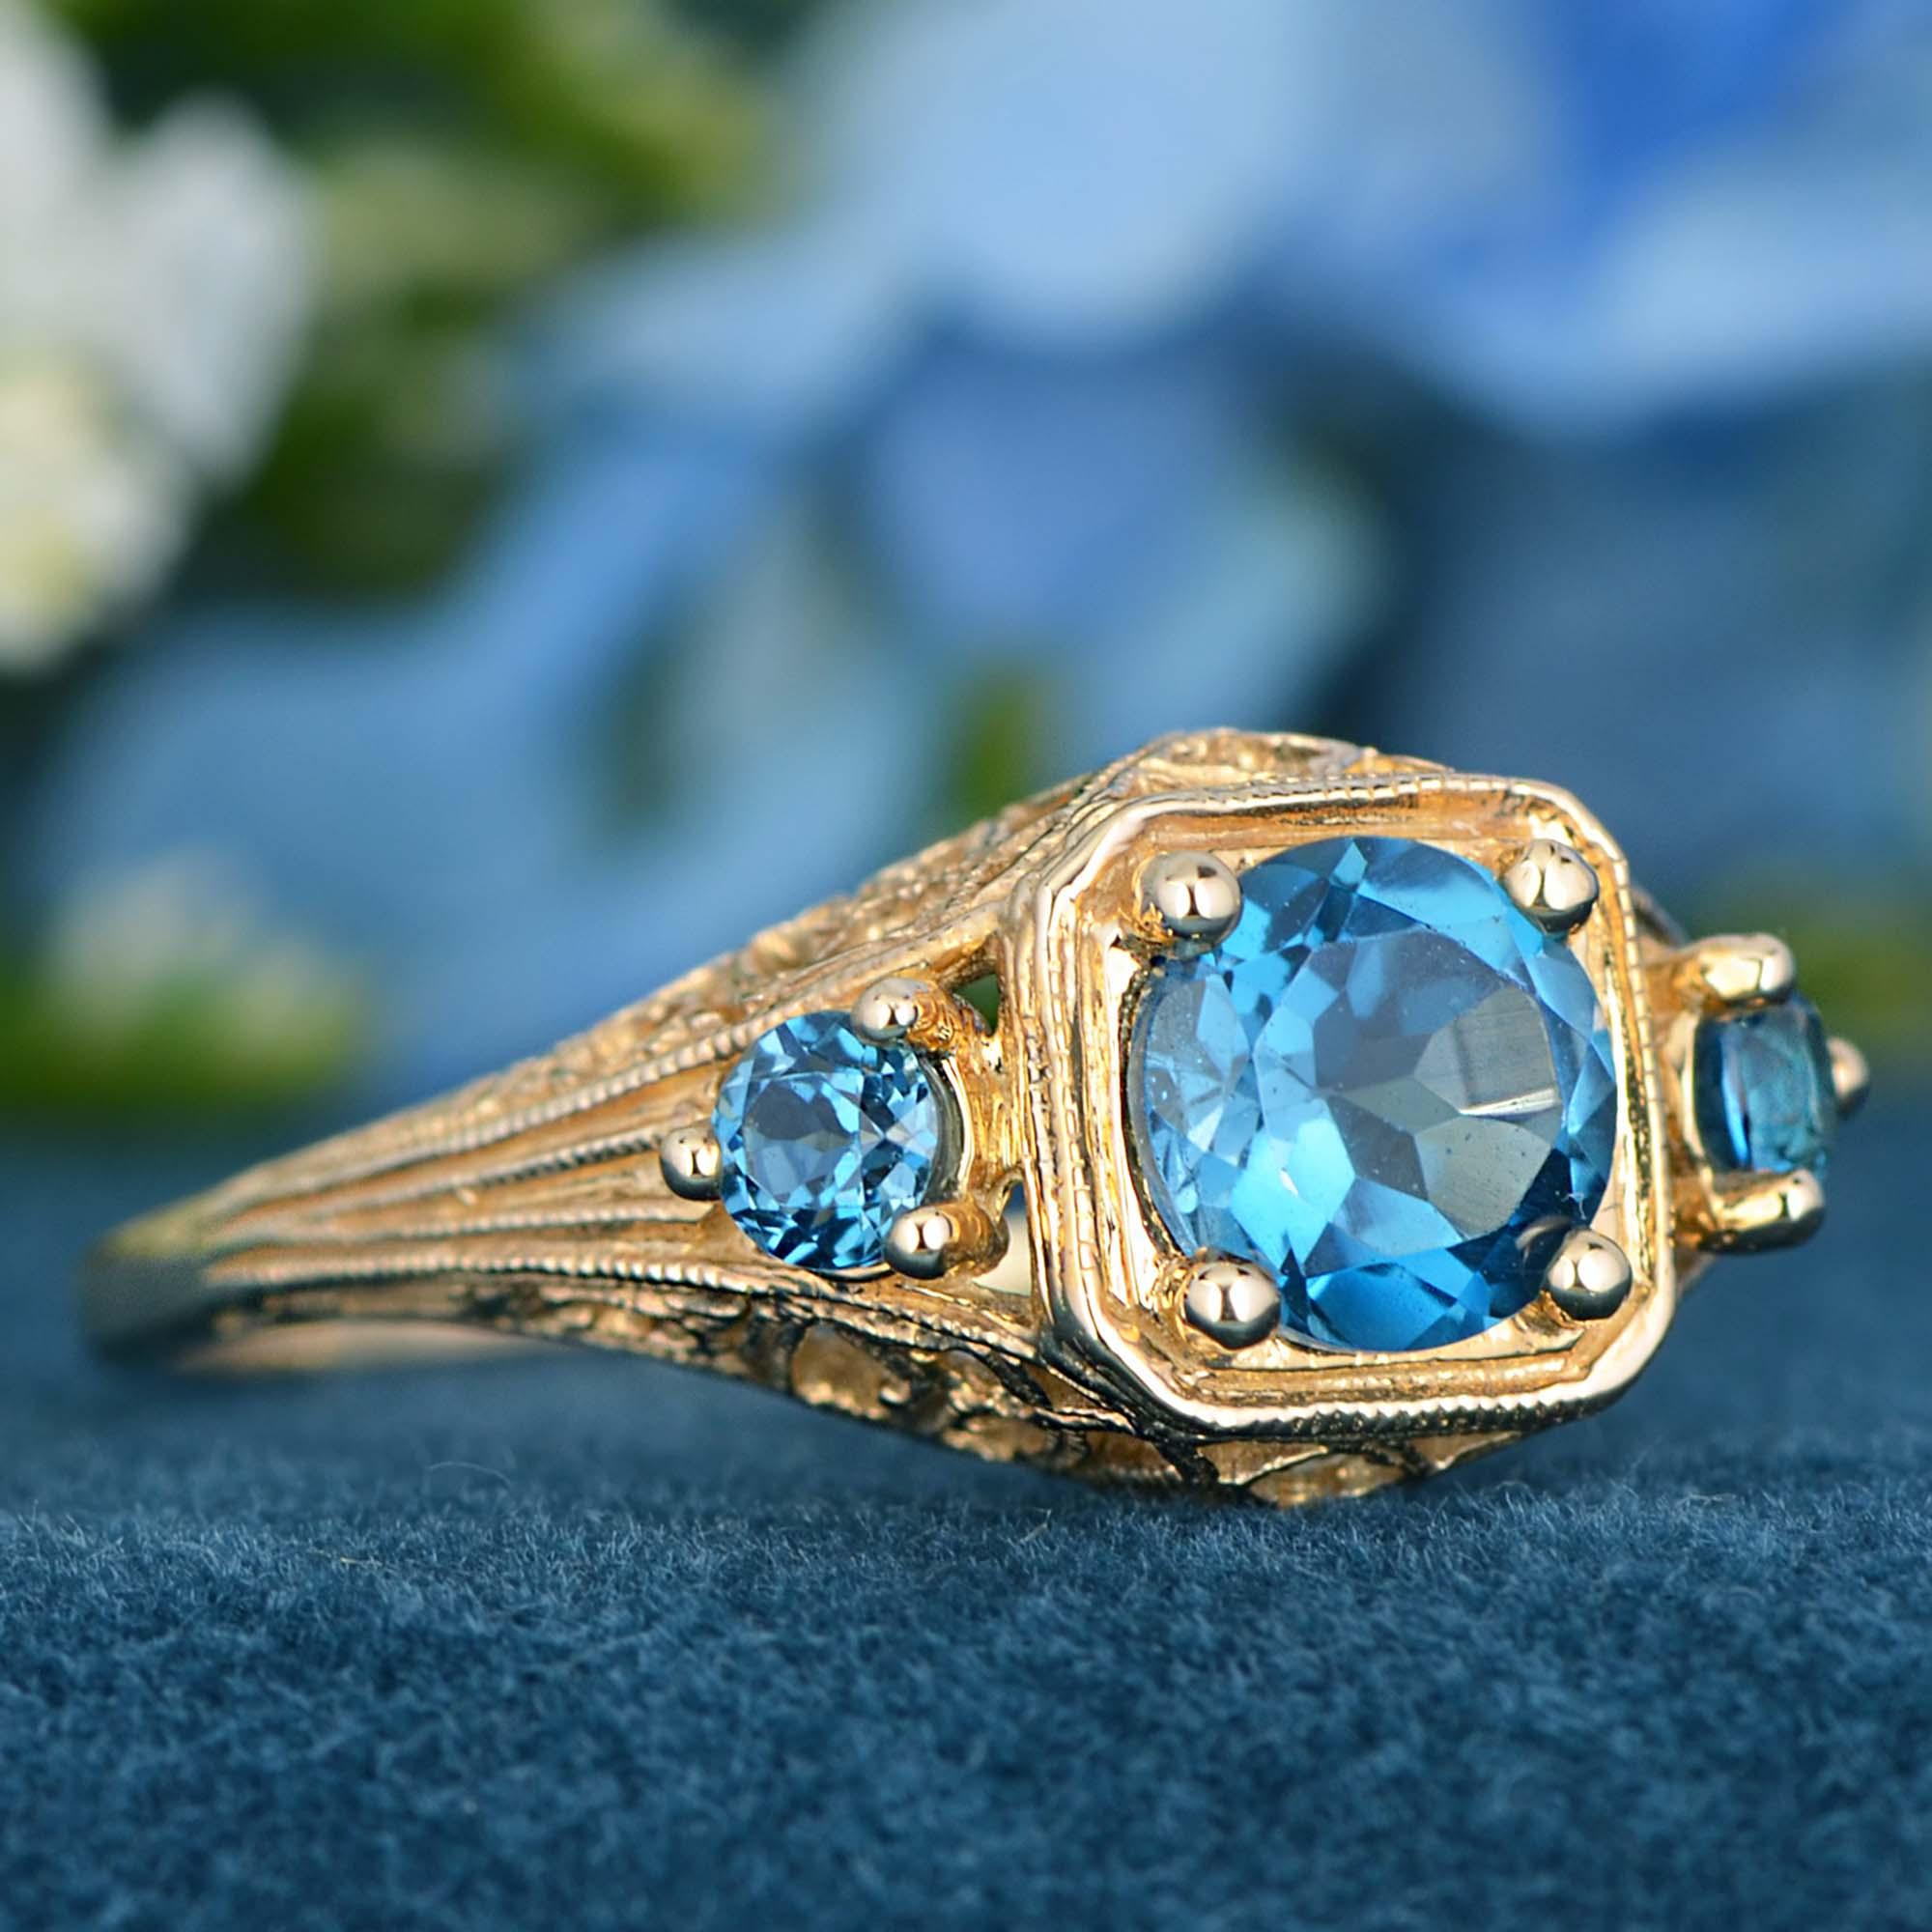 For Sale:  Natural London Blue Topaz Vintage Style Filigree Three Stone Ring in 9K Gold 3